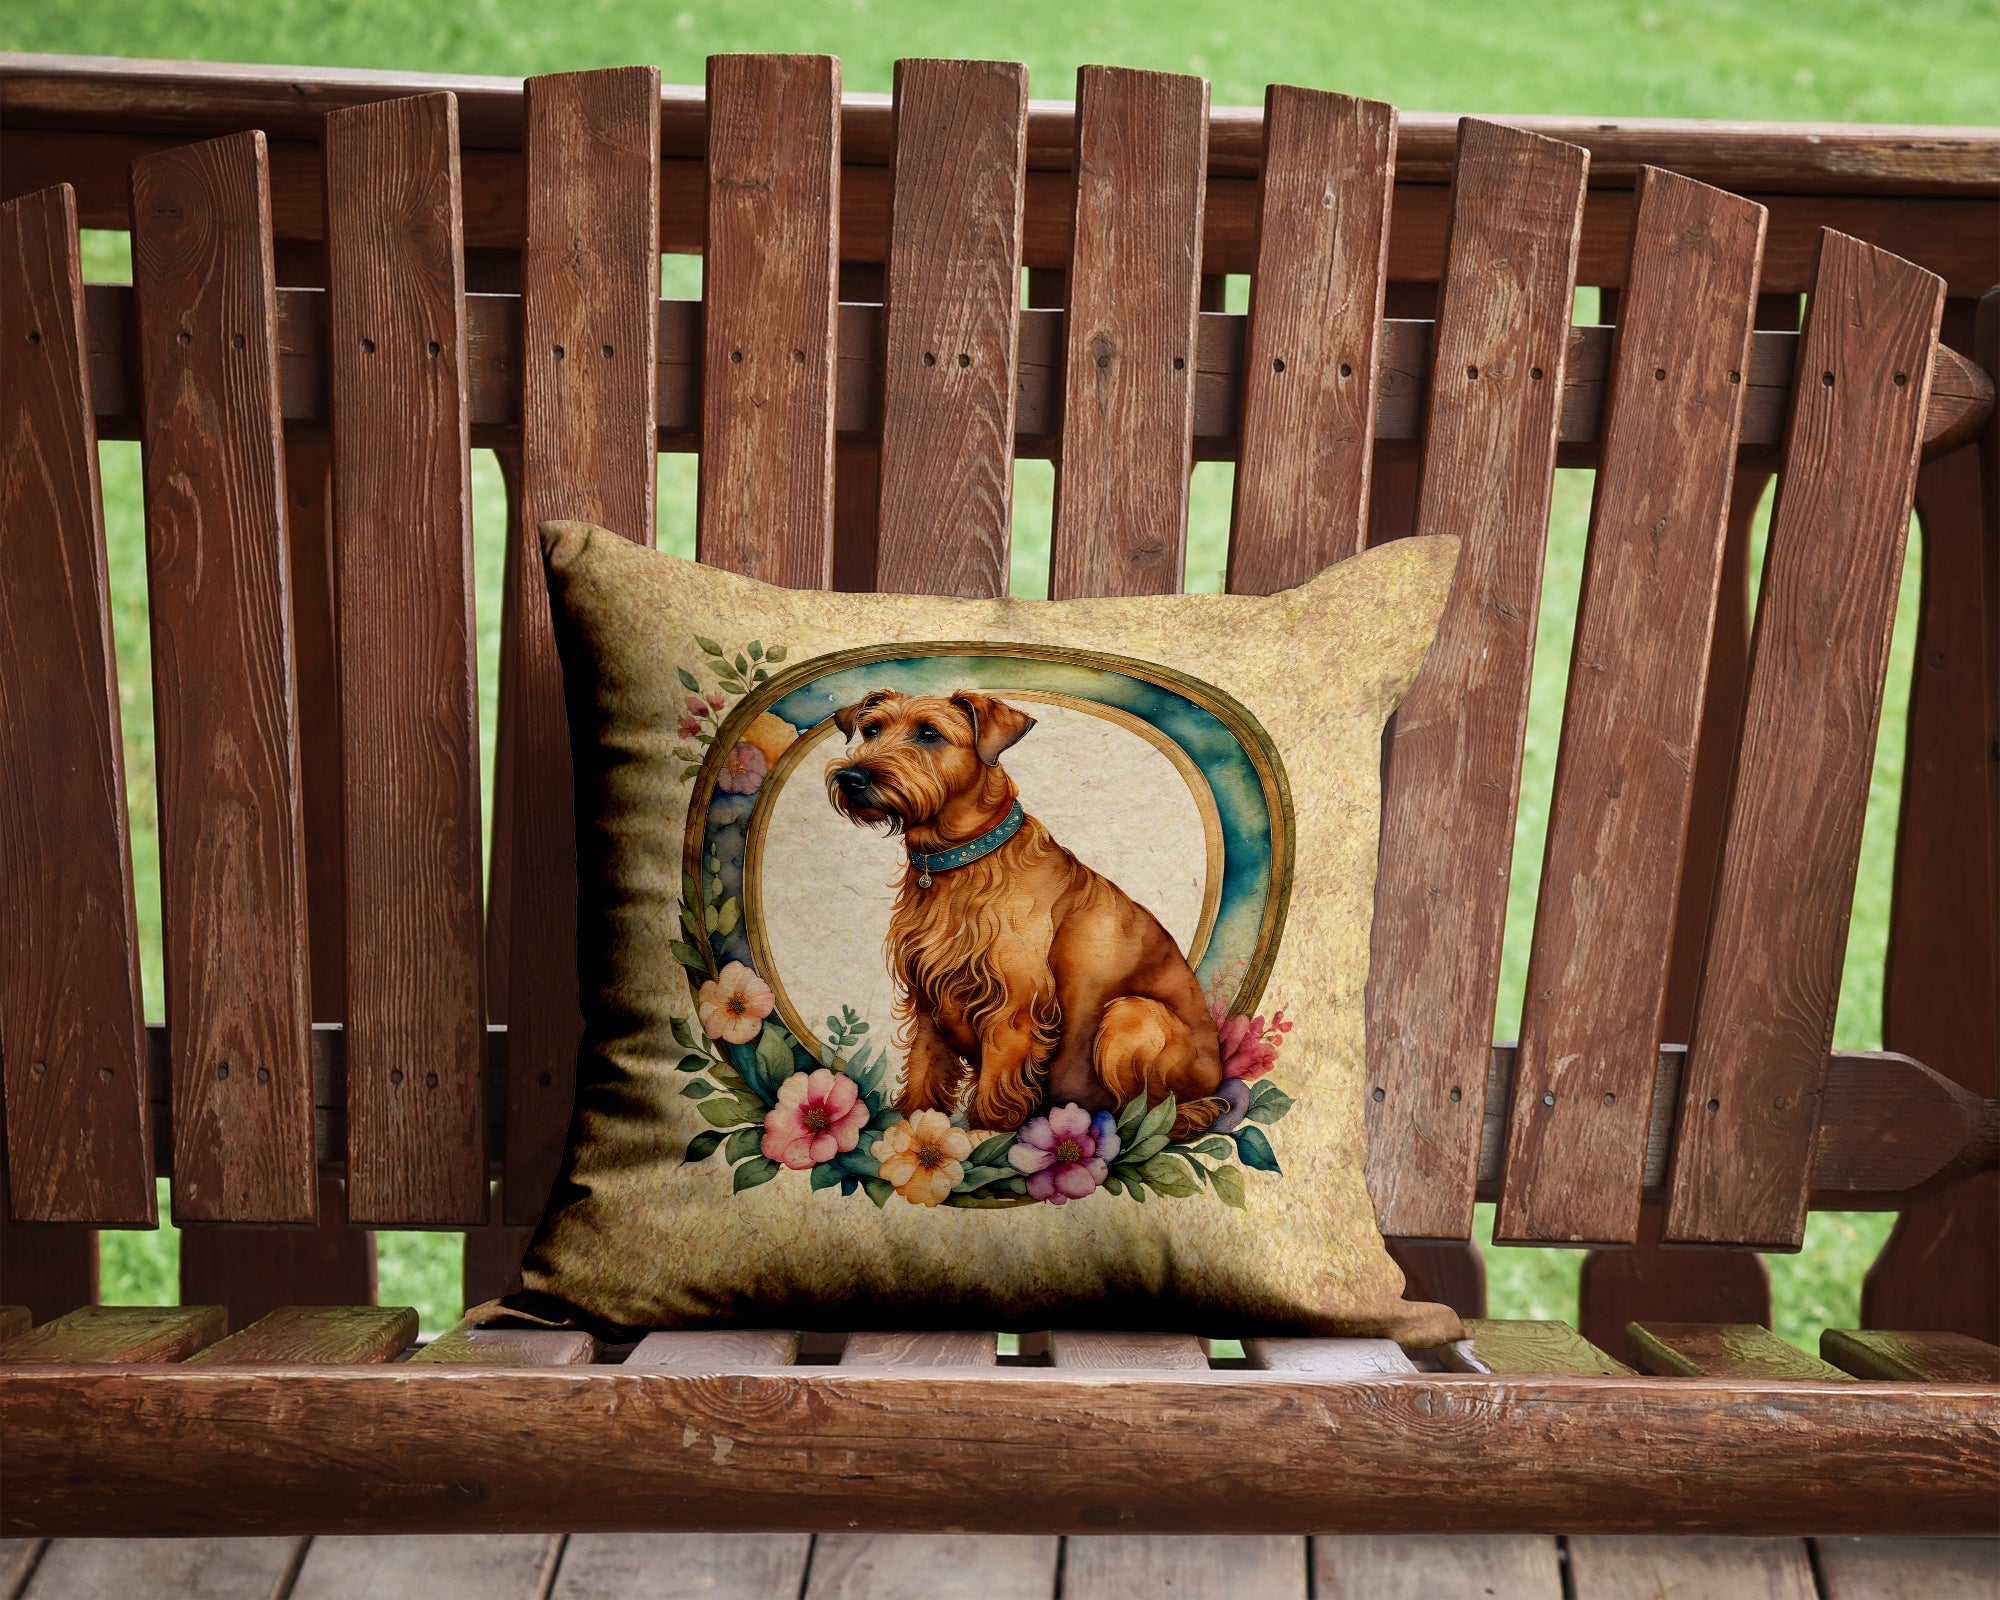 Buy this Irish Terrier and Flowers Fabric Decorative Pillow